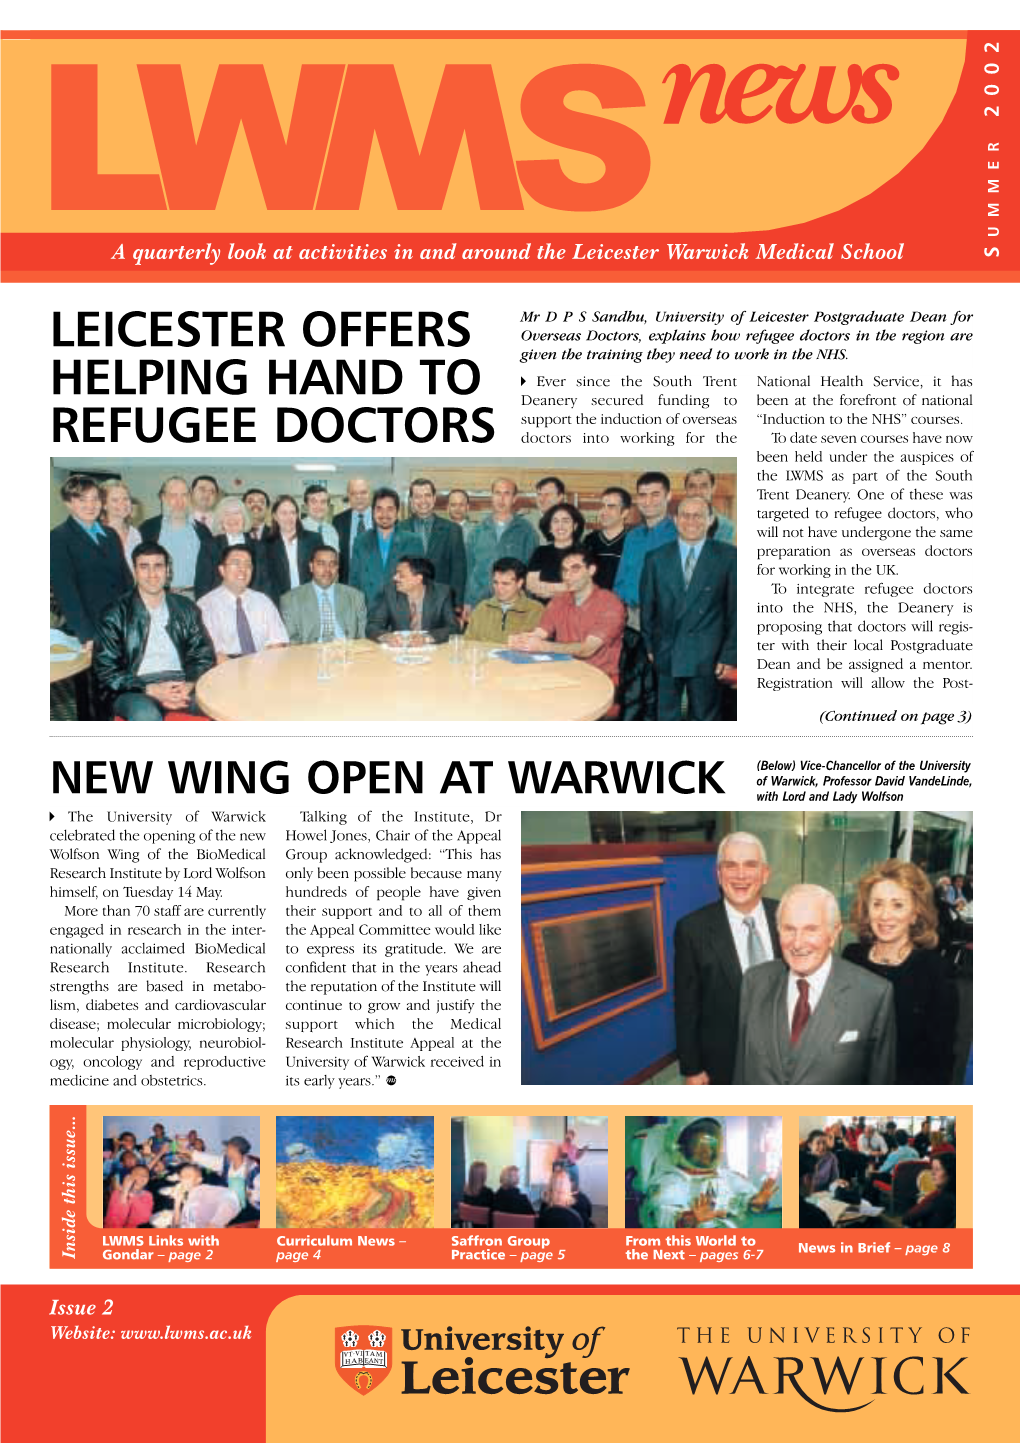 Leicester Offers Helping Hand to Refugee Doctors